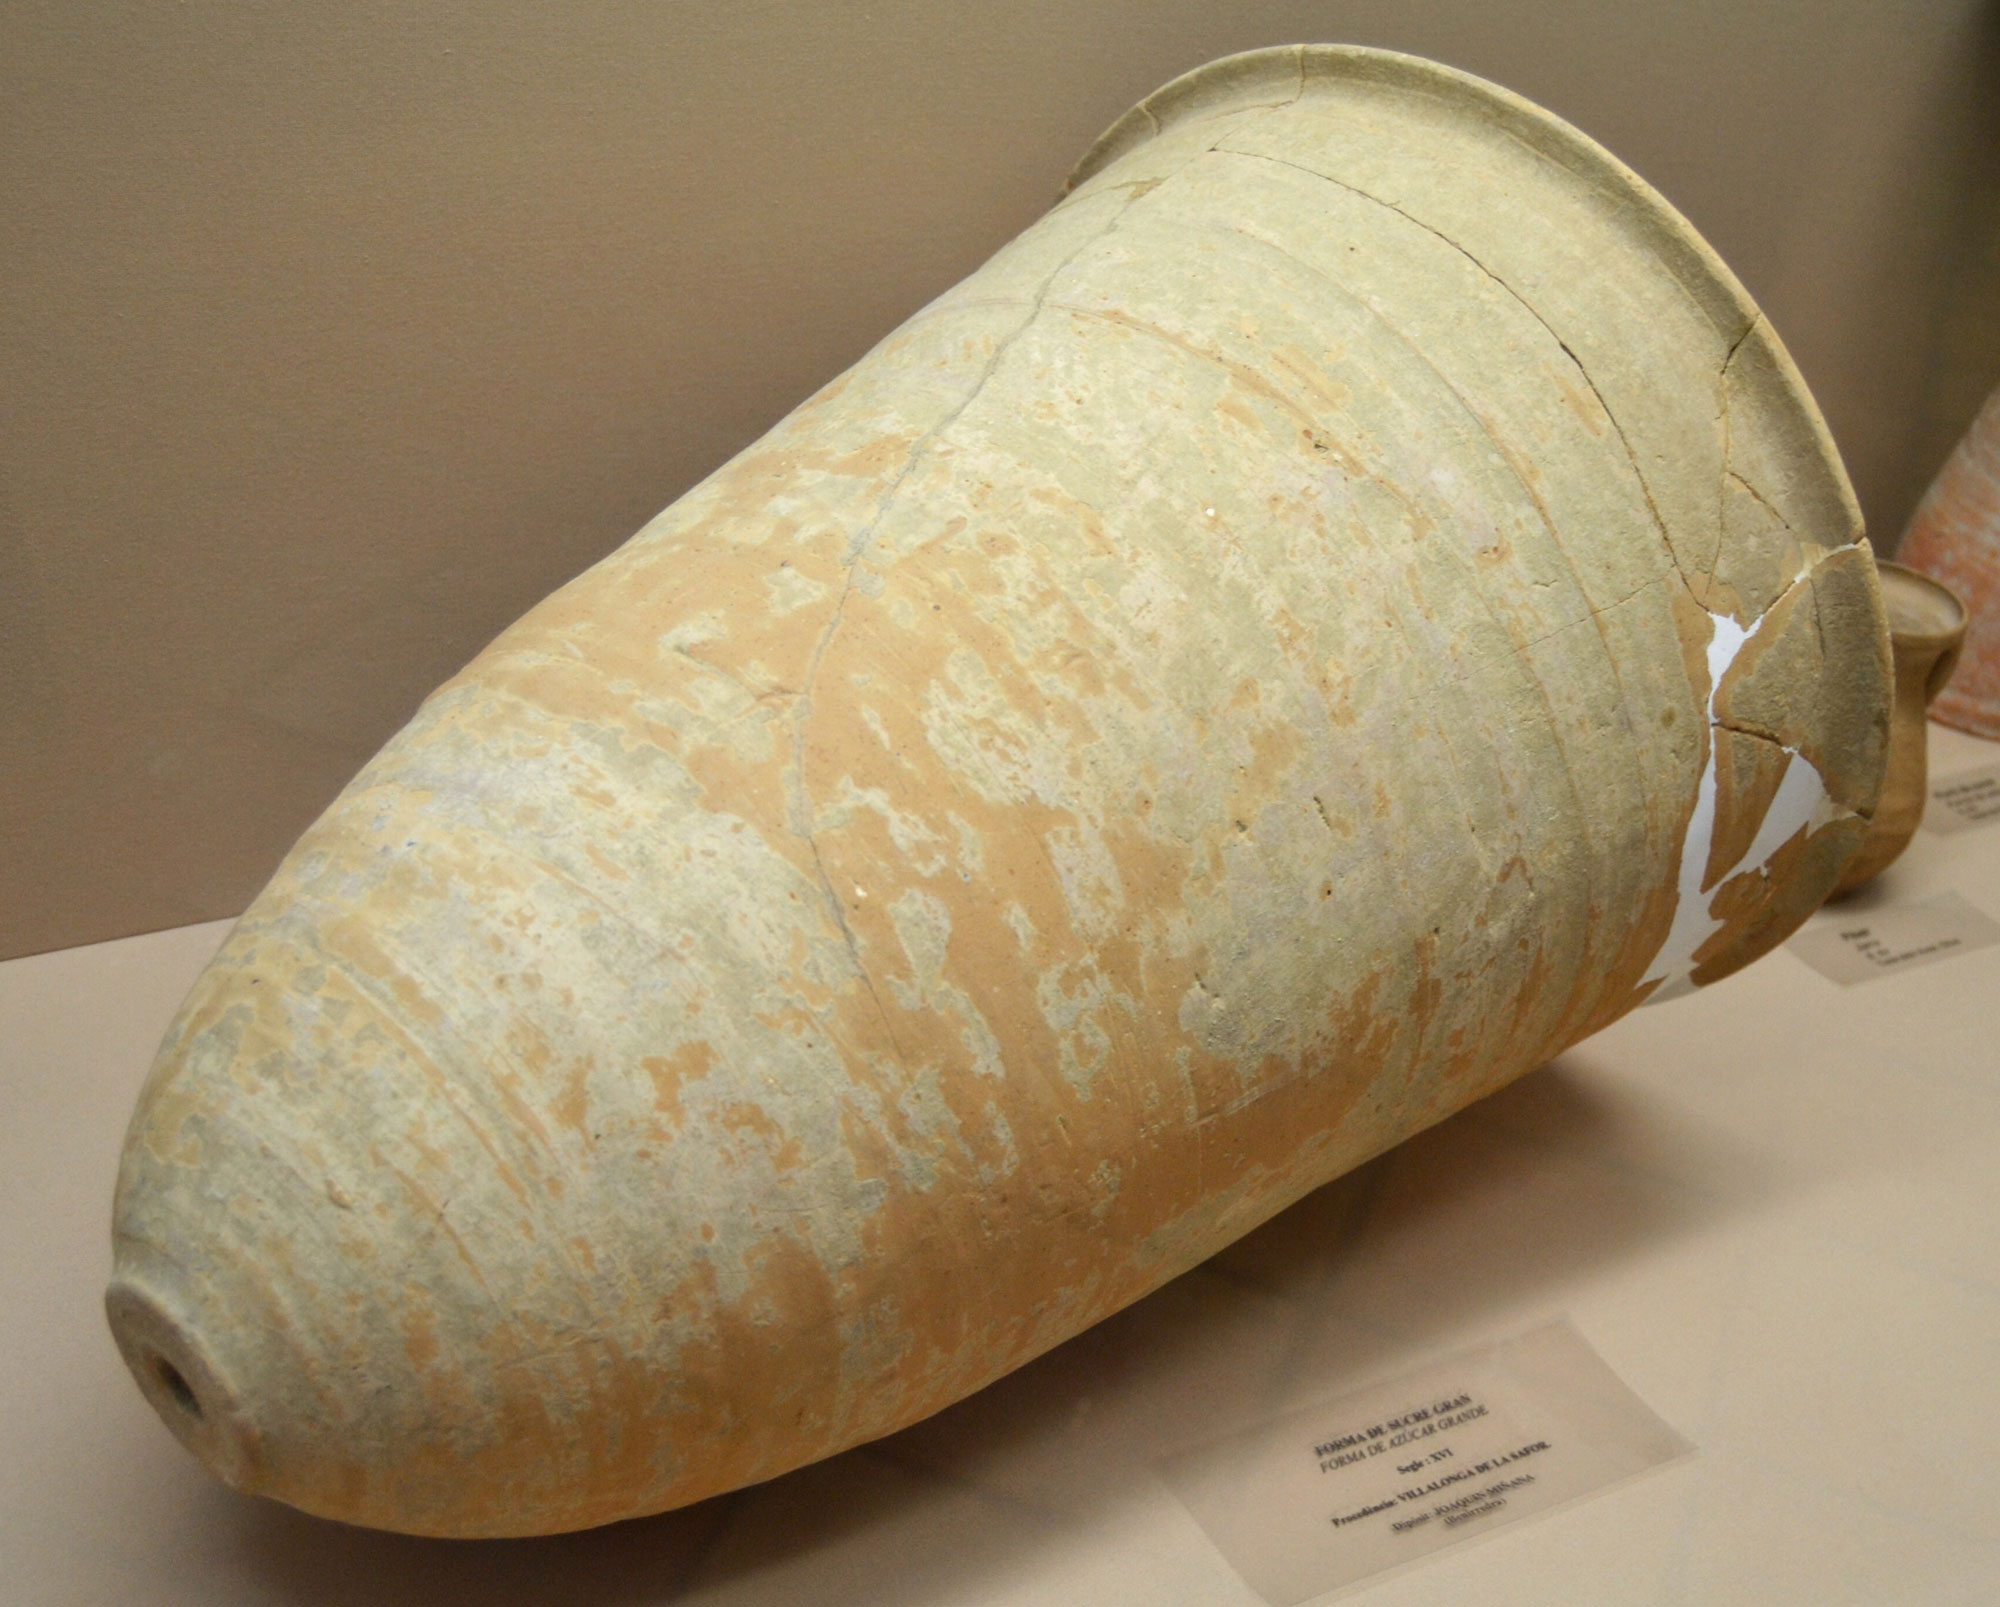 Photograph of a conical ceramic sugar mold from southern Spain dating to the 1500s. The mold has a single hole in the bottom, and the lip has been repaired.